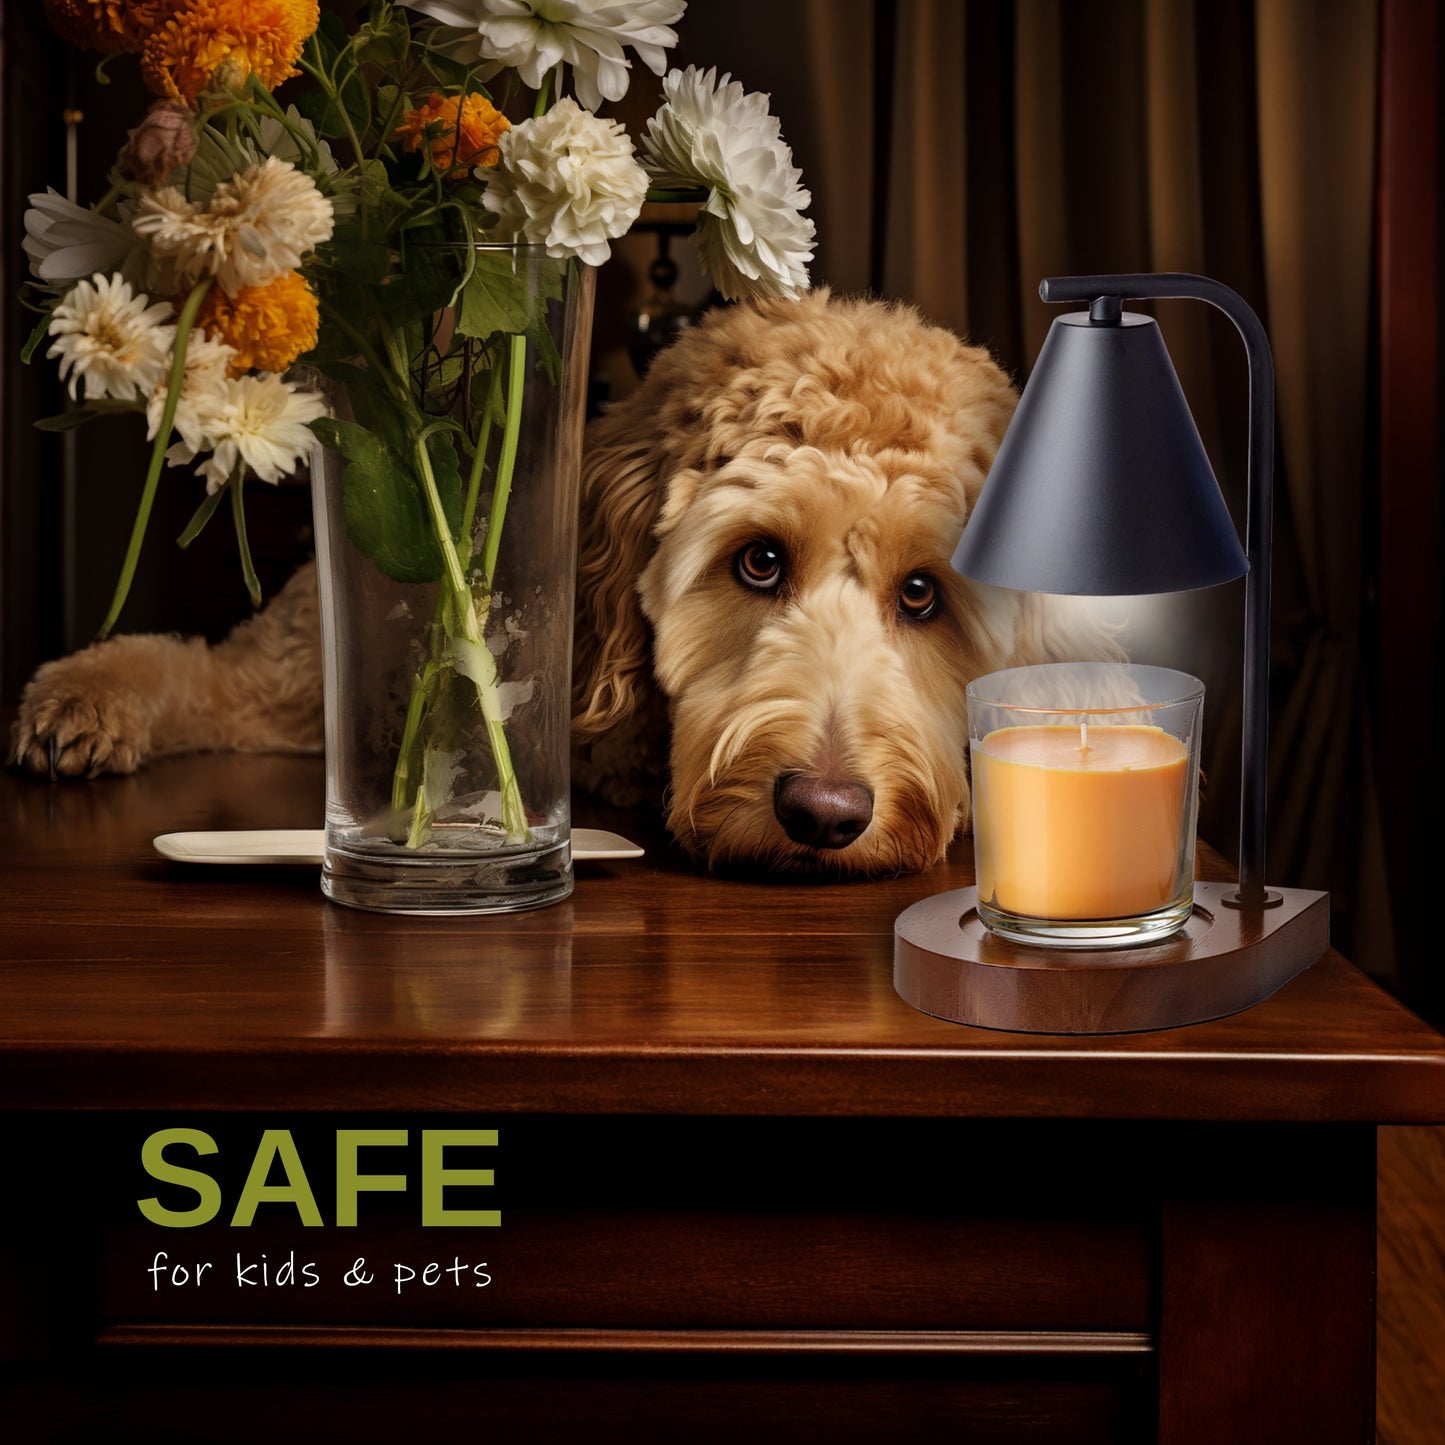 Secure Your Home with our Eco-Friendly, Flameless Candle Warmer Lamp